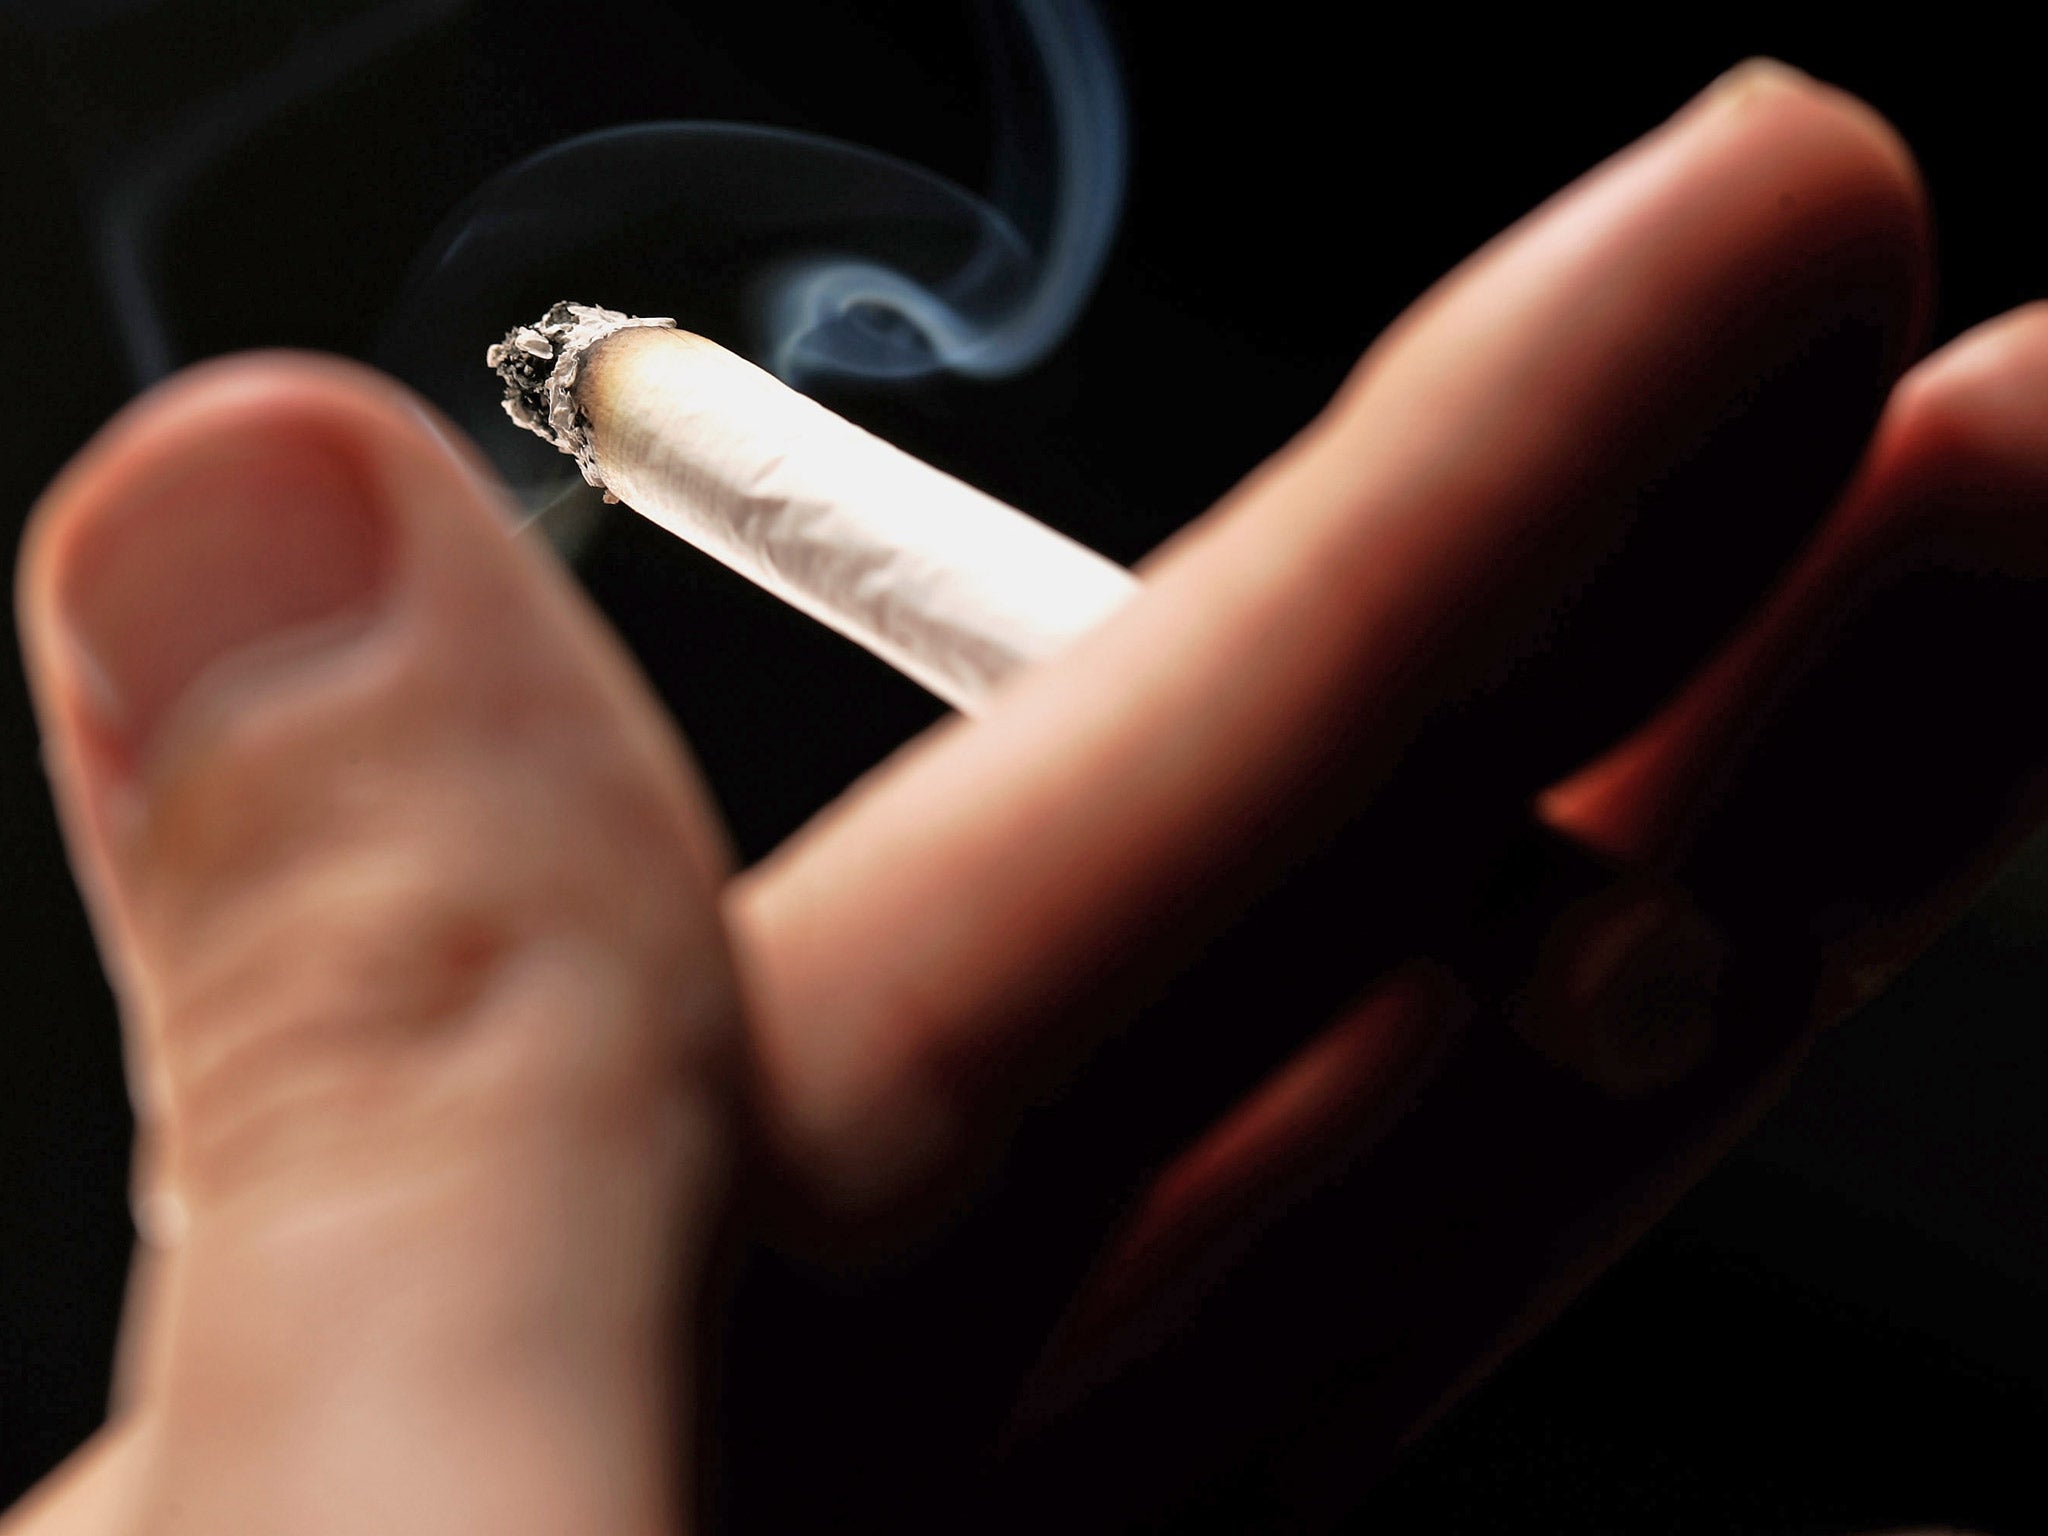 The cost of social care for health problems caused by smoking is growing UK-wide